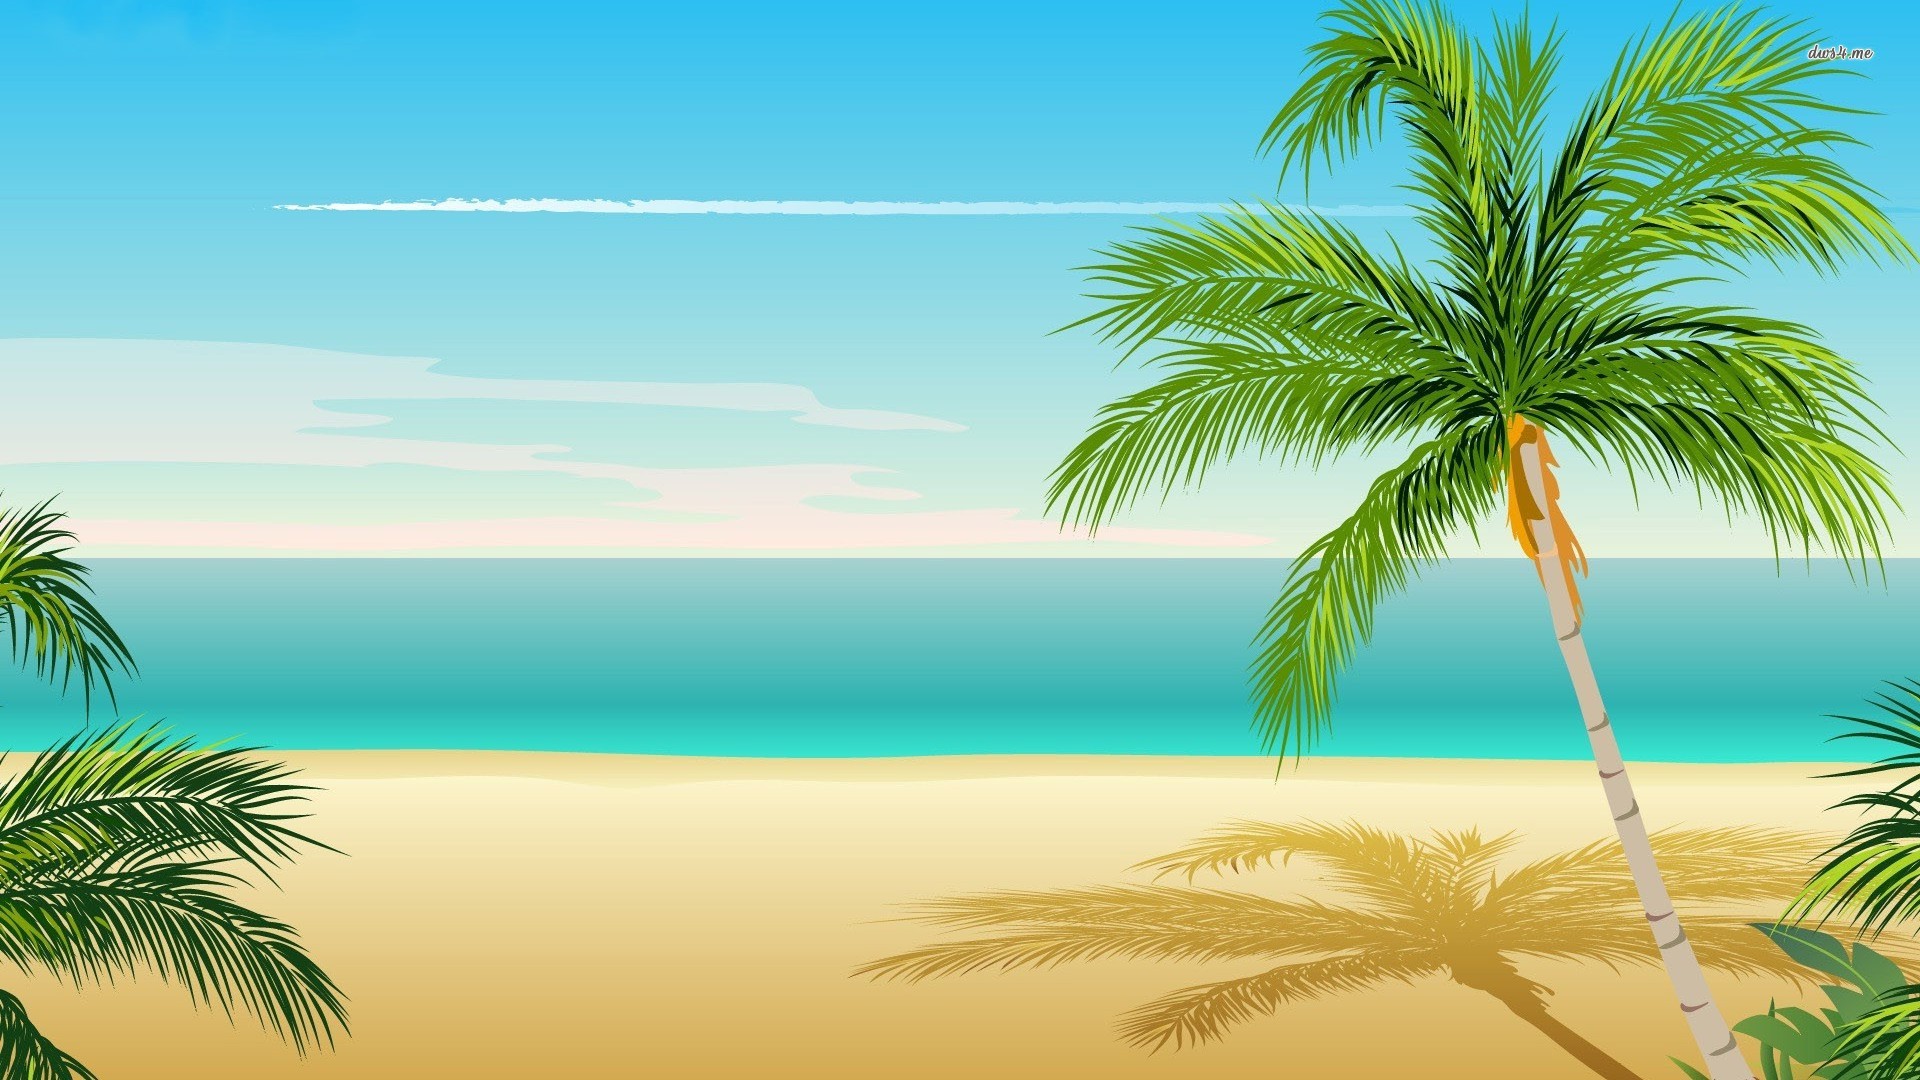 Page Scenery Wallpapers Backgrounds Download Free Palm Tree